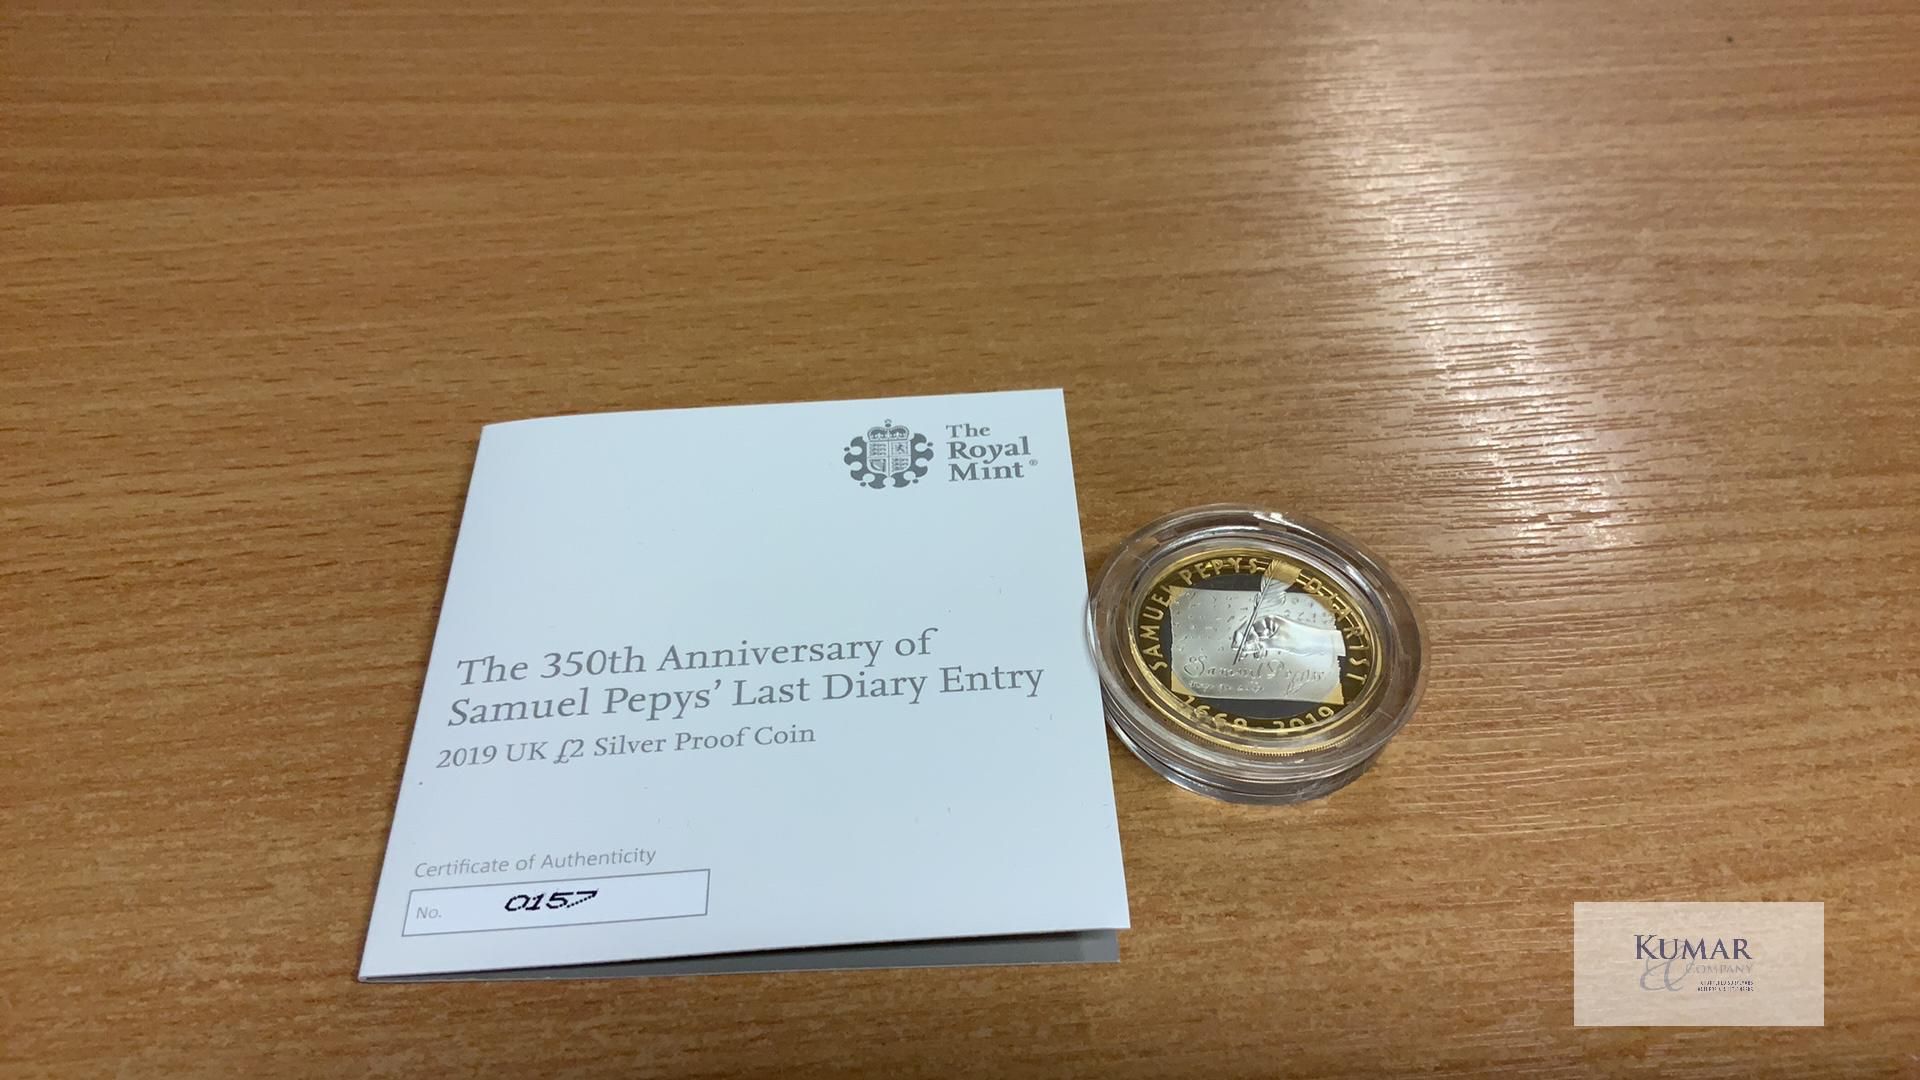 The Royal Mint Coin - The 350th Anniversary of Samuel Pepys Last Diary Entry 2019 UK £2 Silver Proof - Image 2 of 4